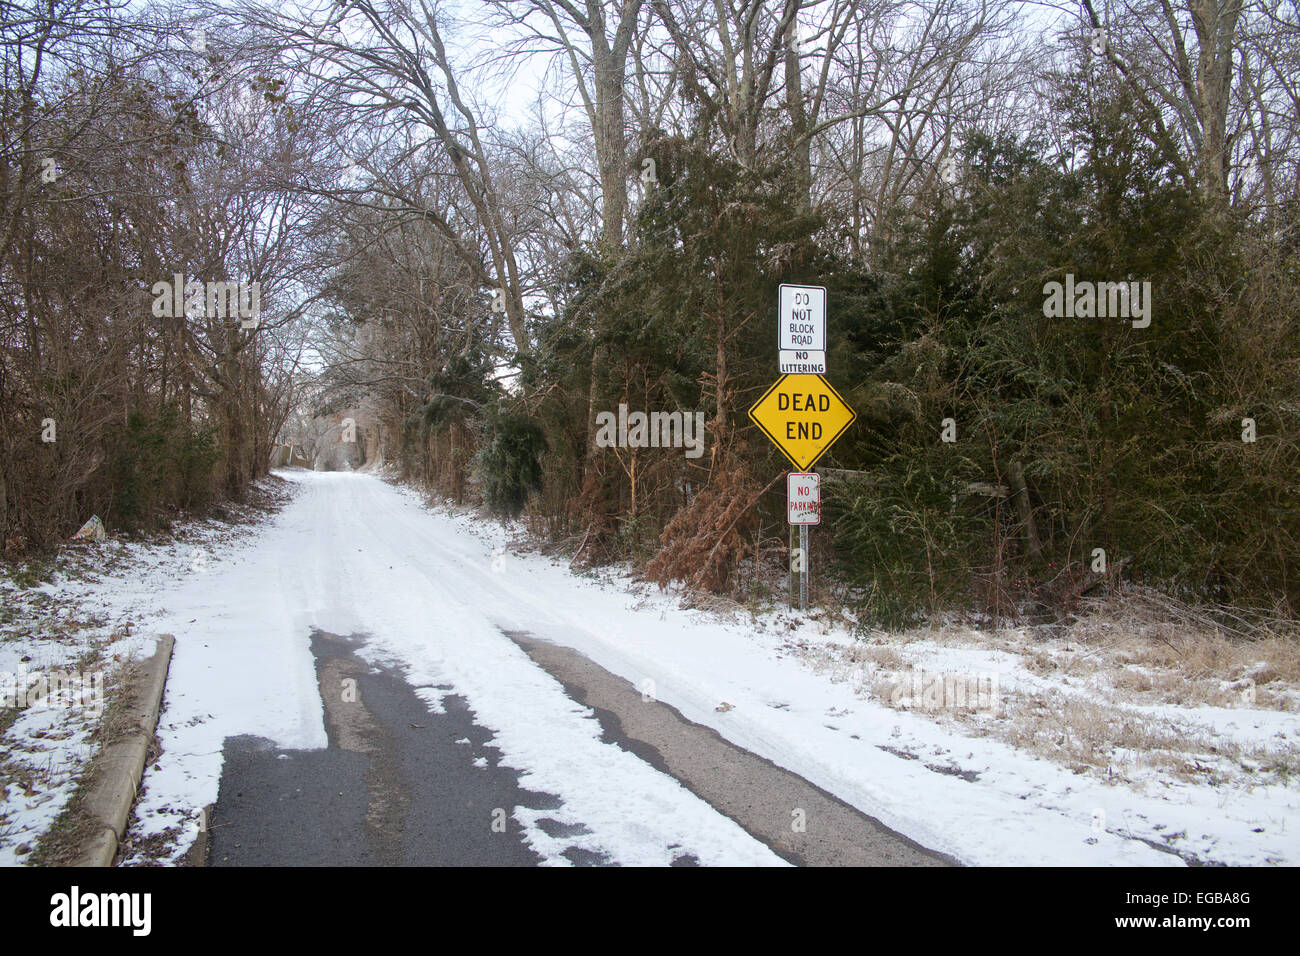 Snowy wooded roadway with dead end sign in front on entrance. Stock Photo